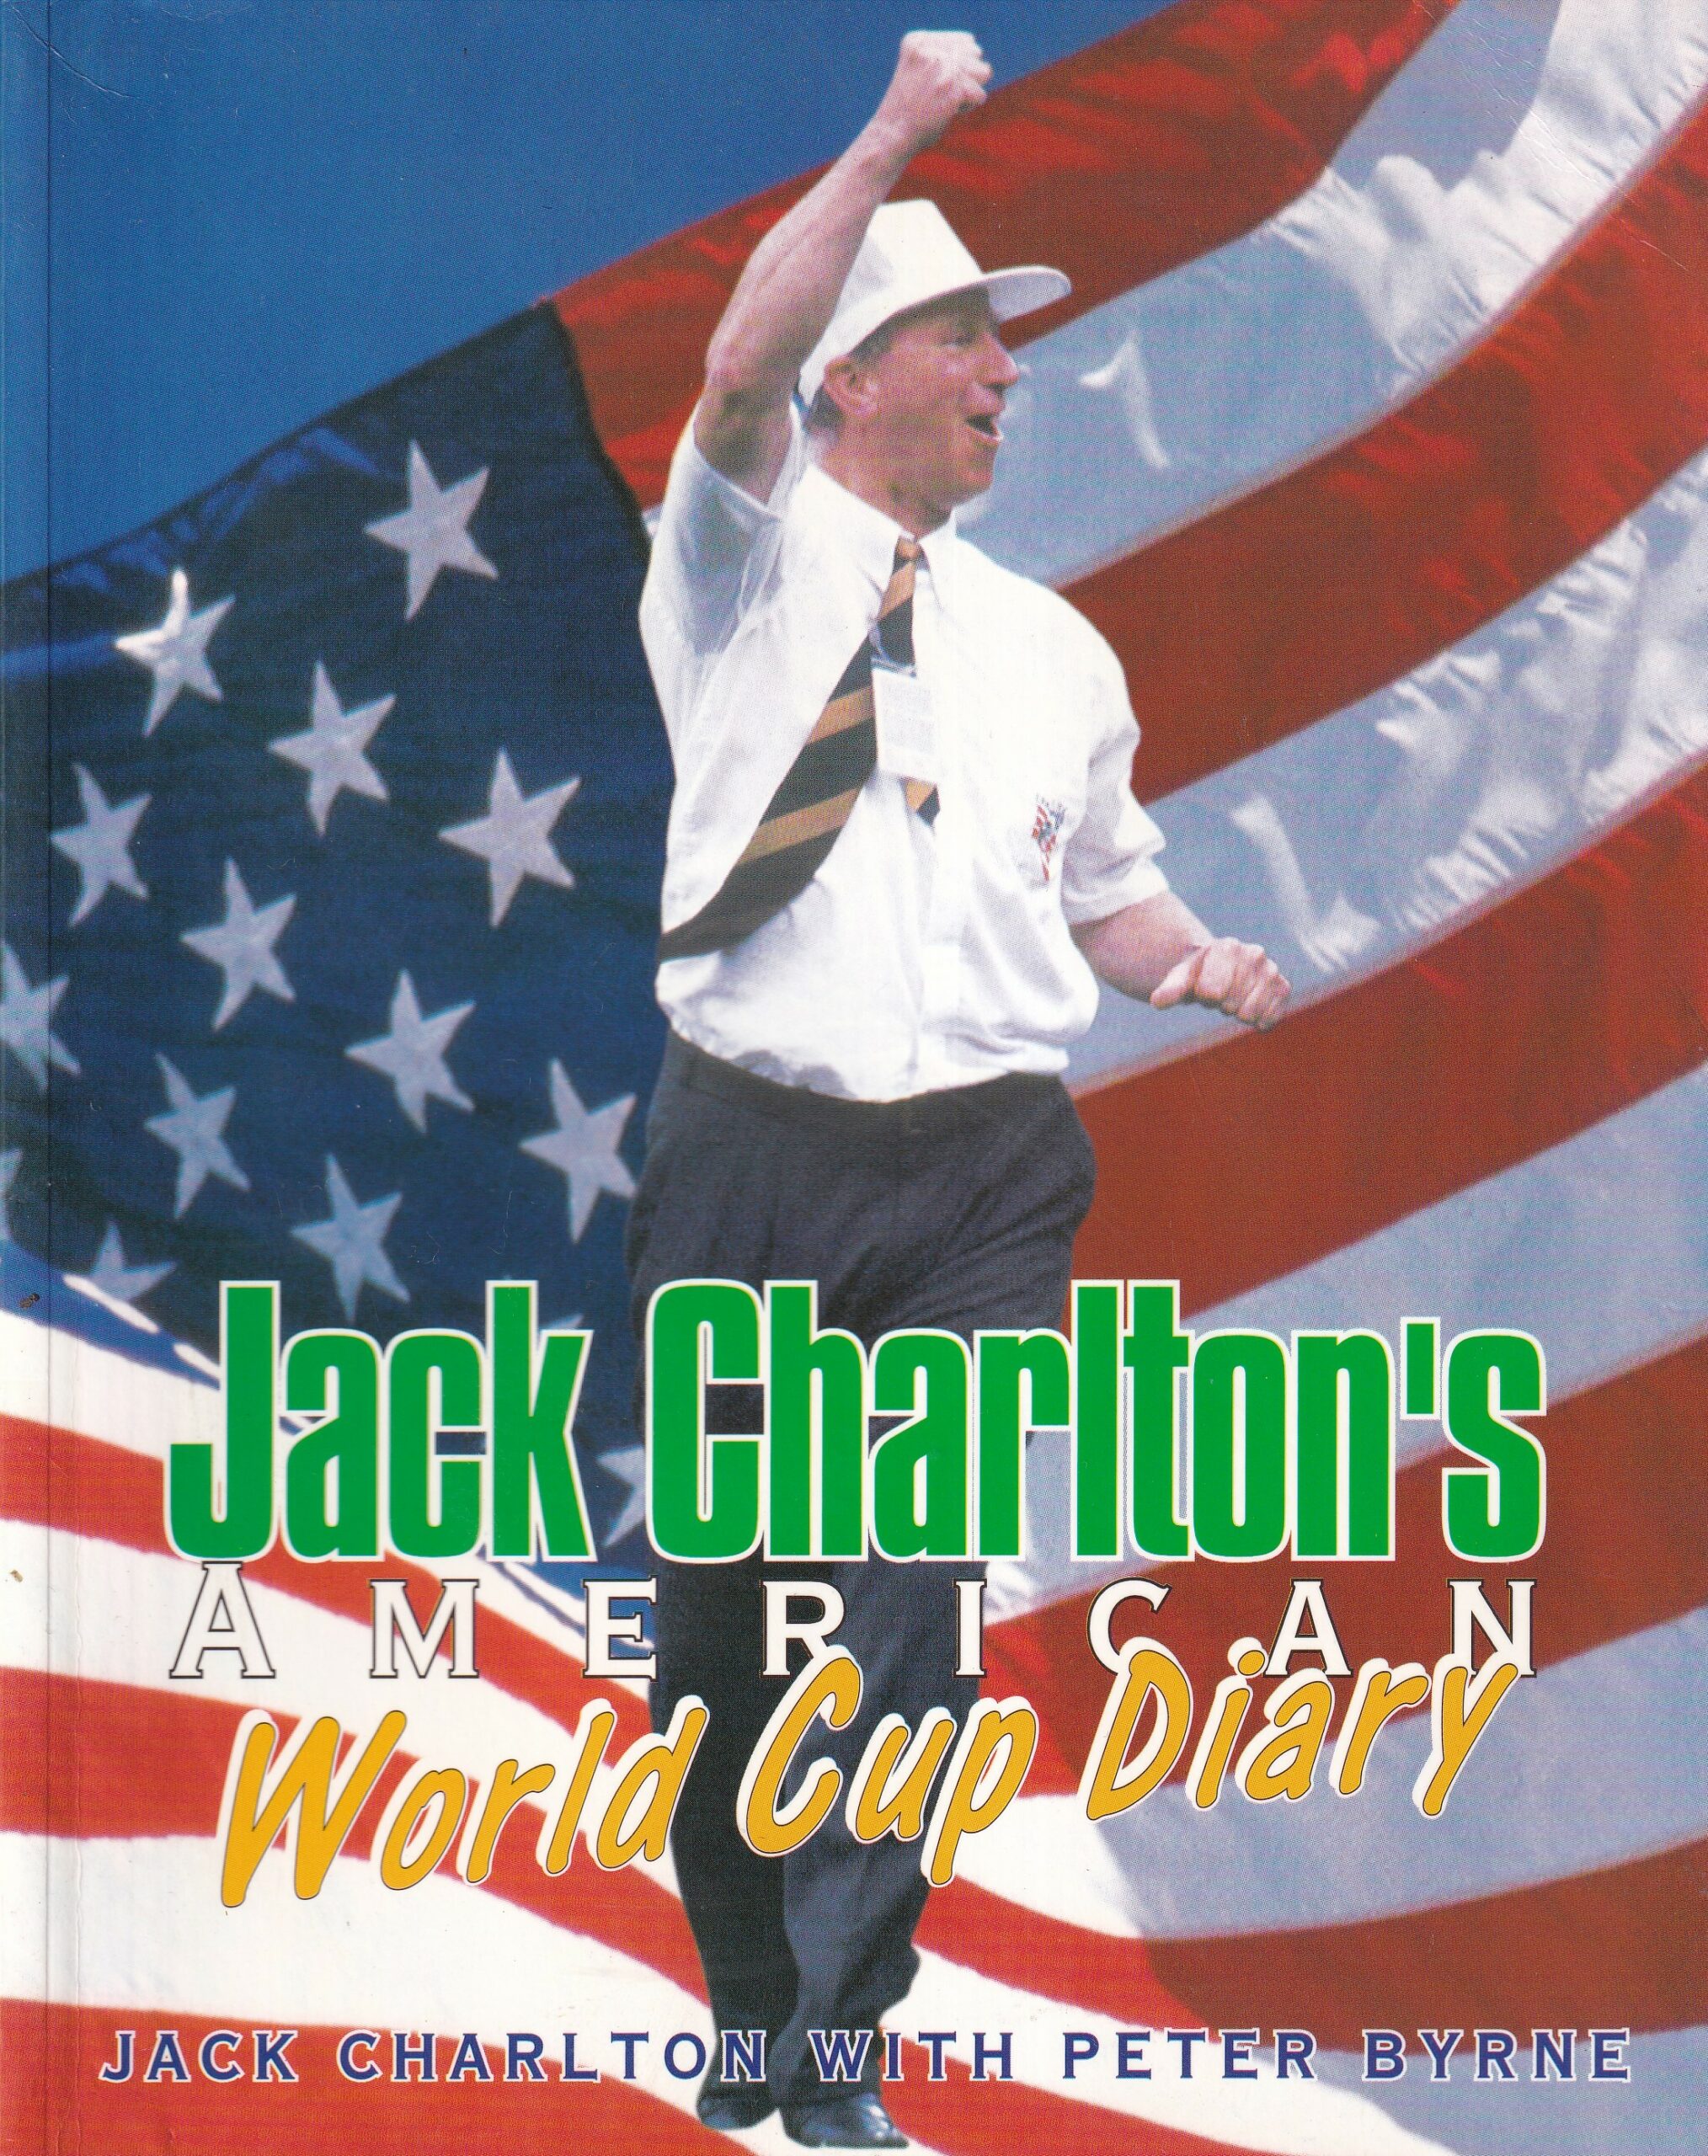 Jack Charlton’s American World Cup Diary by Jack Charlton and Peter Byrne